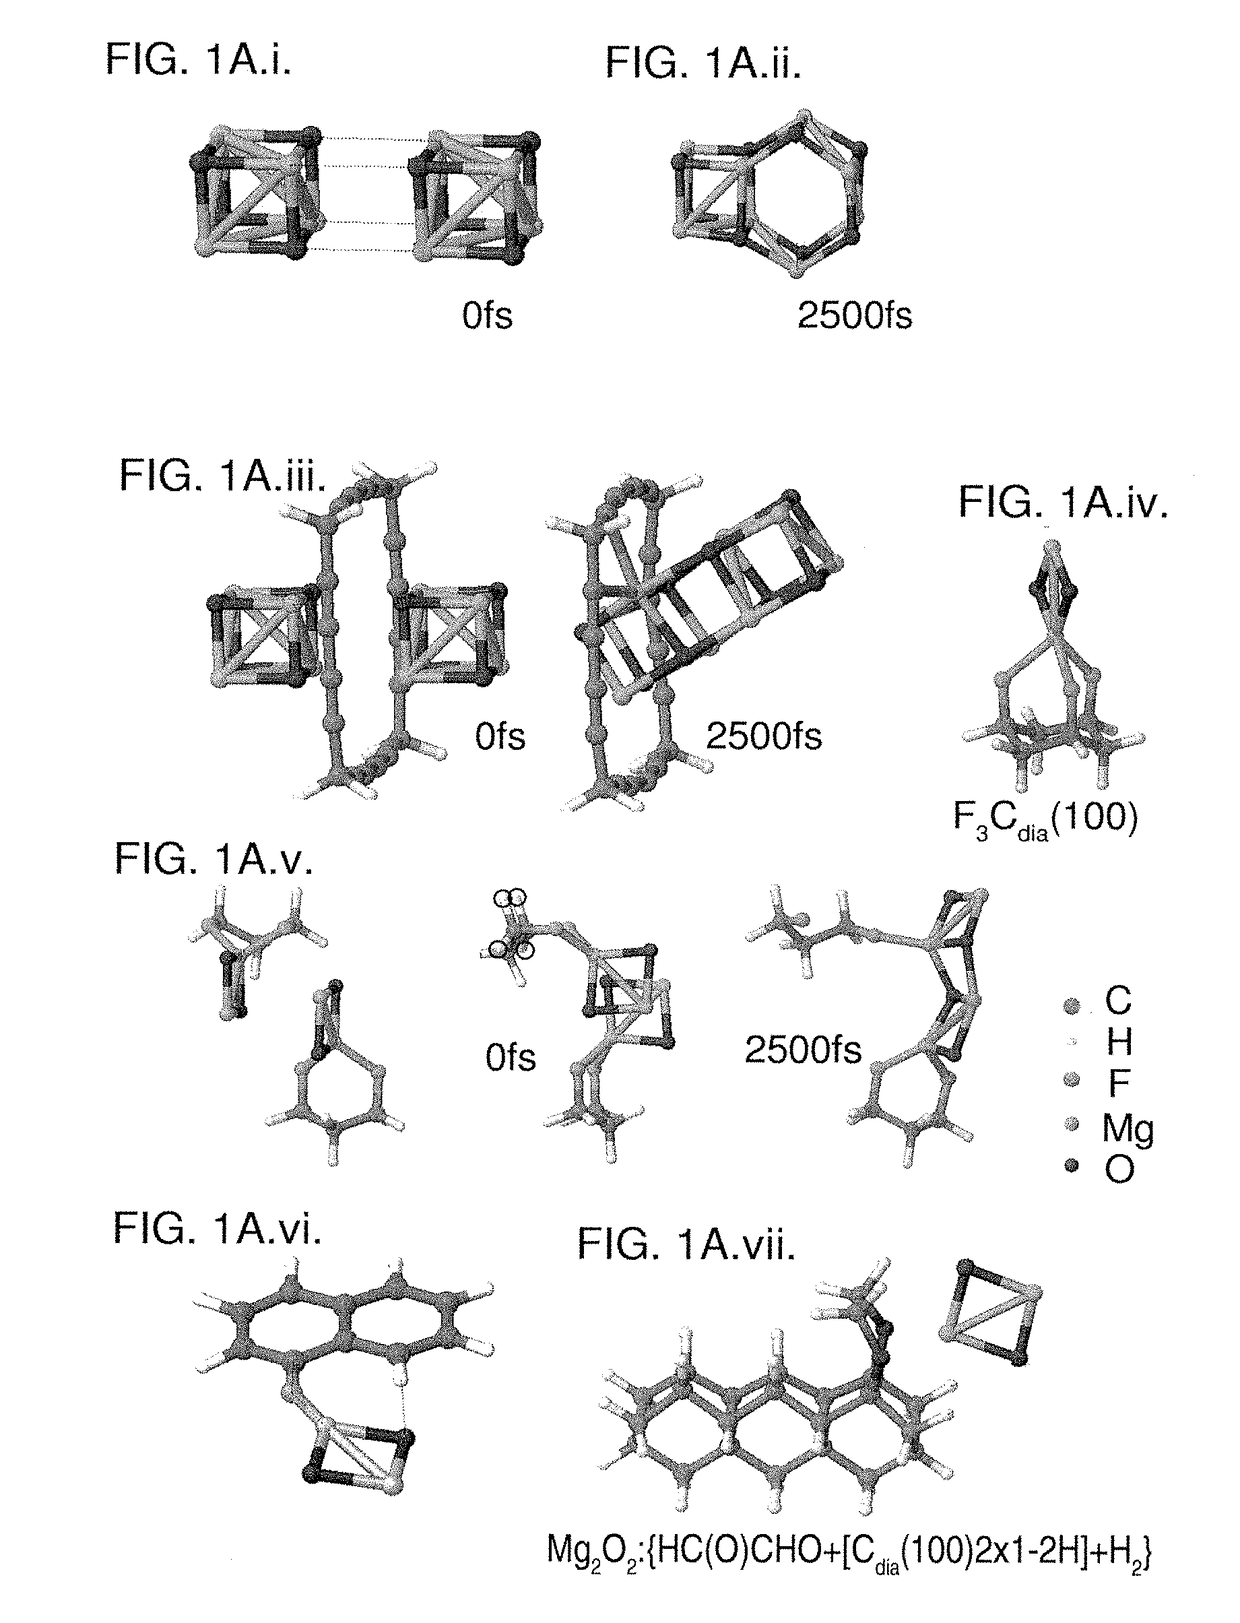 Convergent nanofabrication and nanoassembly methods, means and applications thereof, products and systems therefrom including methods and means for conversion of pollutants to useful products